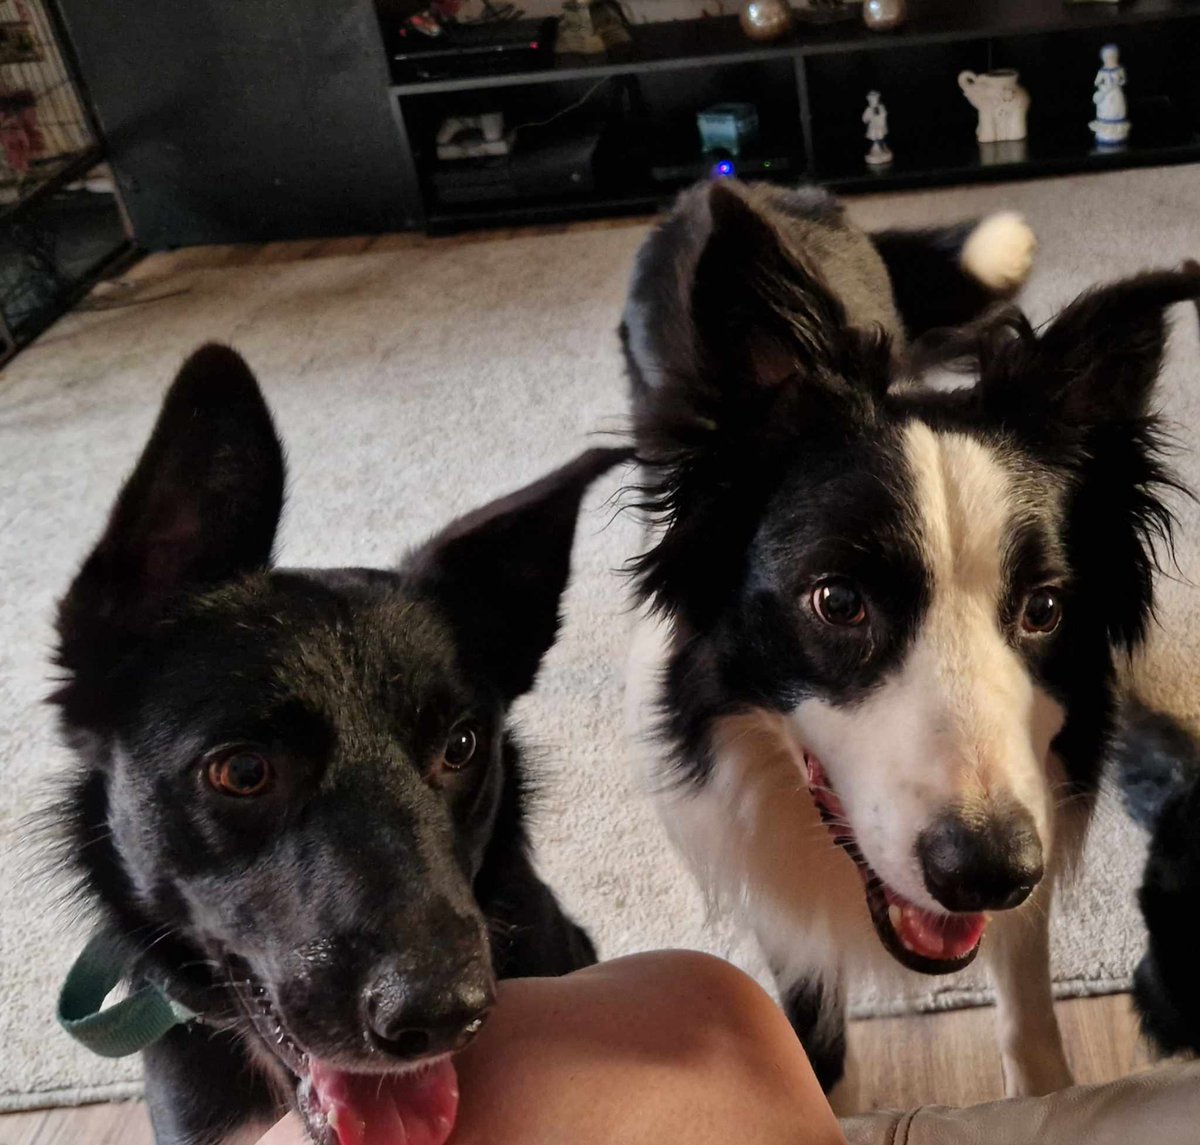 AVAILABLE FOR ADOPTION🖤 These 2 handsome boys have been with us a few weeks now. They can be adopted separately, but we have this lovely photo of them both together REX (black) is 1 year old and ENZO (black and white) is 4 years old #BorderCollie #BorderCollieLovers #AdoptMe